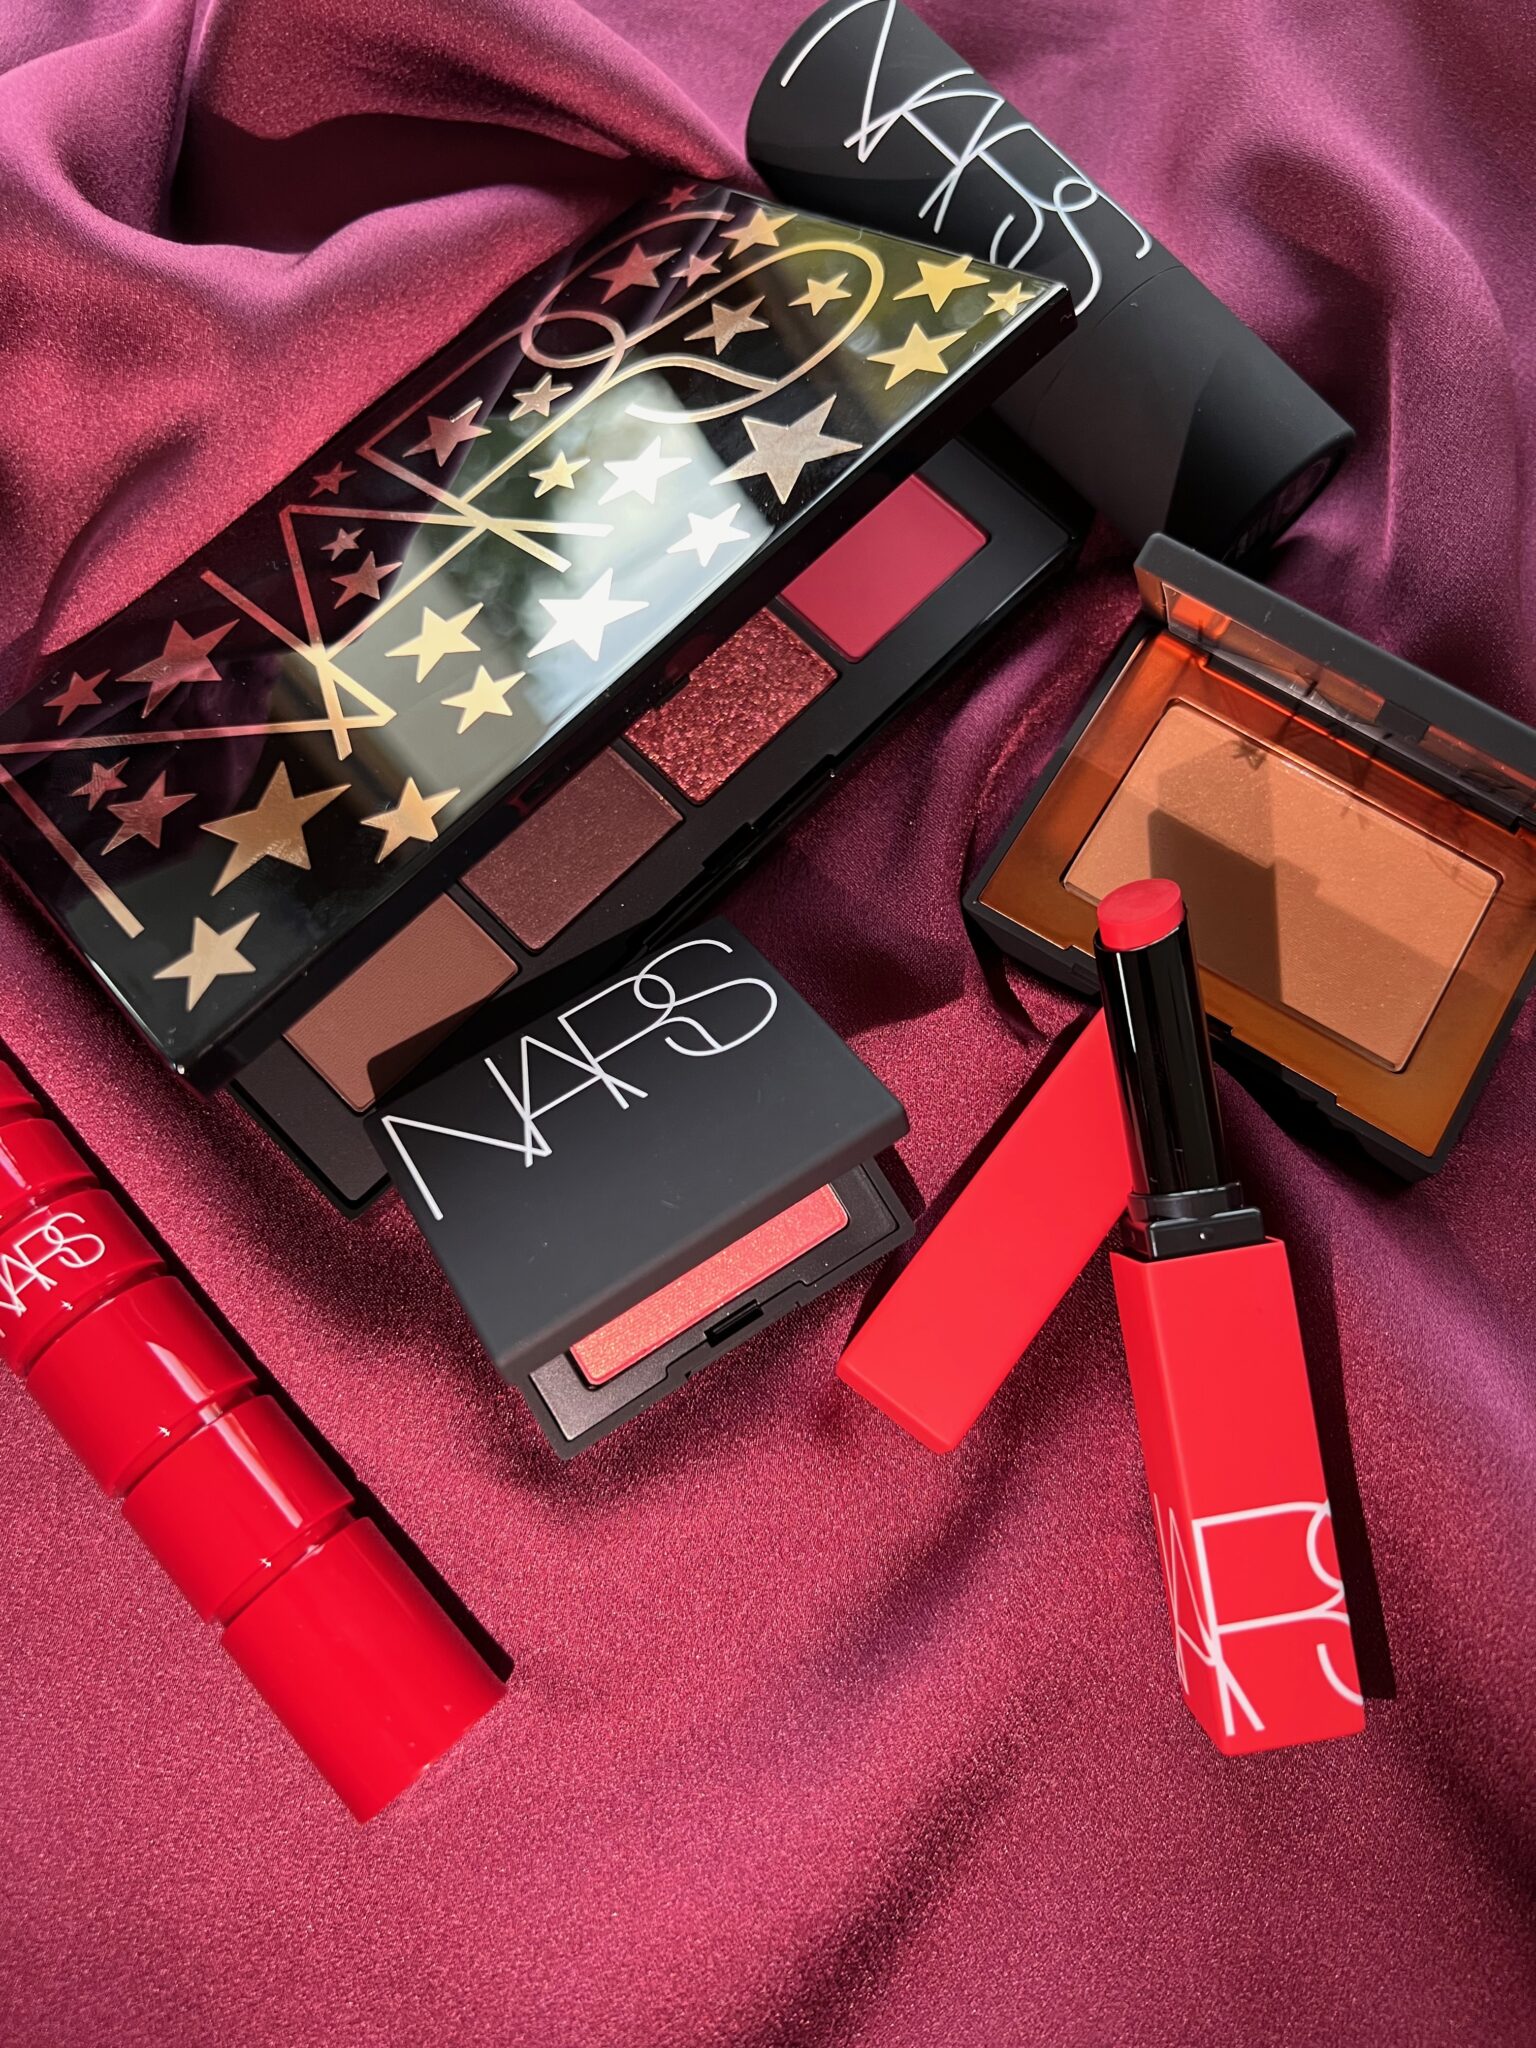 Christmas at Sephora - Top Holiday 2022 Gift Sets For Women. Nars, Sephora, Benefit and more. 5